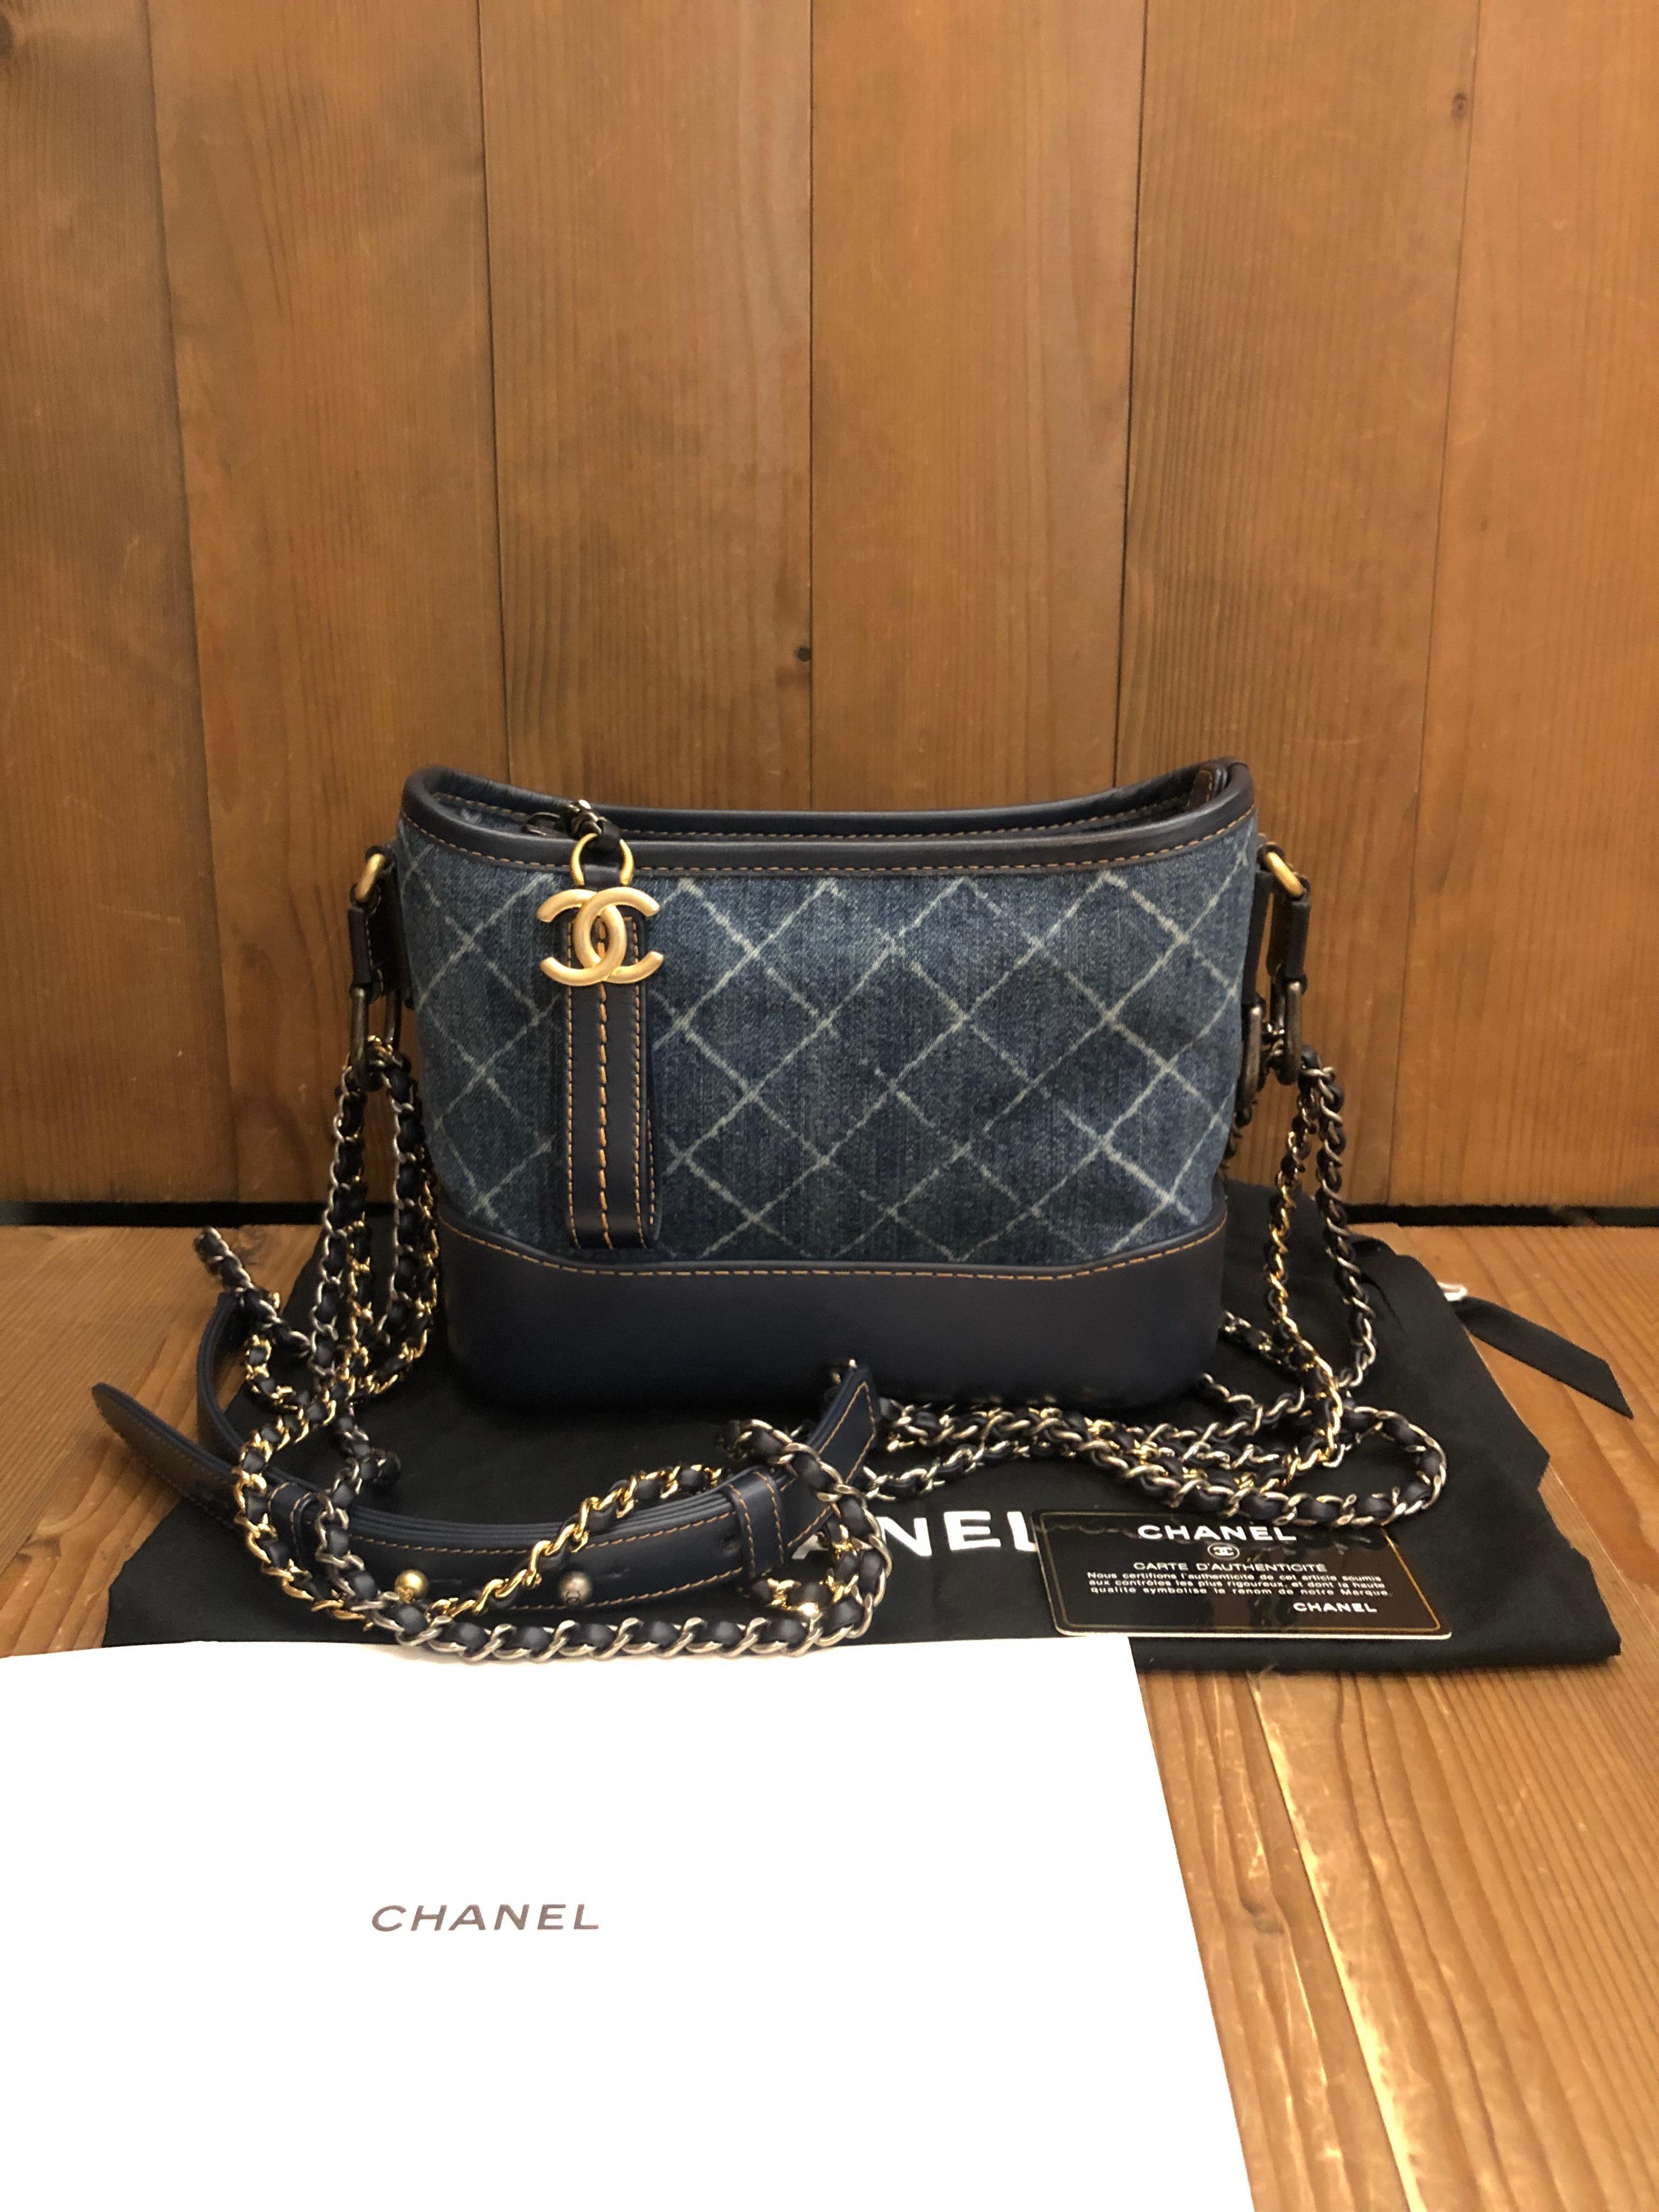 This CHANEL small Gabrielle hobo bag is crafted of blue denim printed in chanel diamond quilted pattern and calfskin leather in blue. Top zipper closure opens to a fabric interior featuring a zippered pocket and a leather strap with clasp. Duel